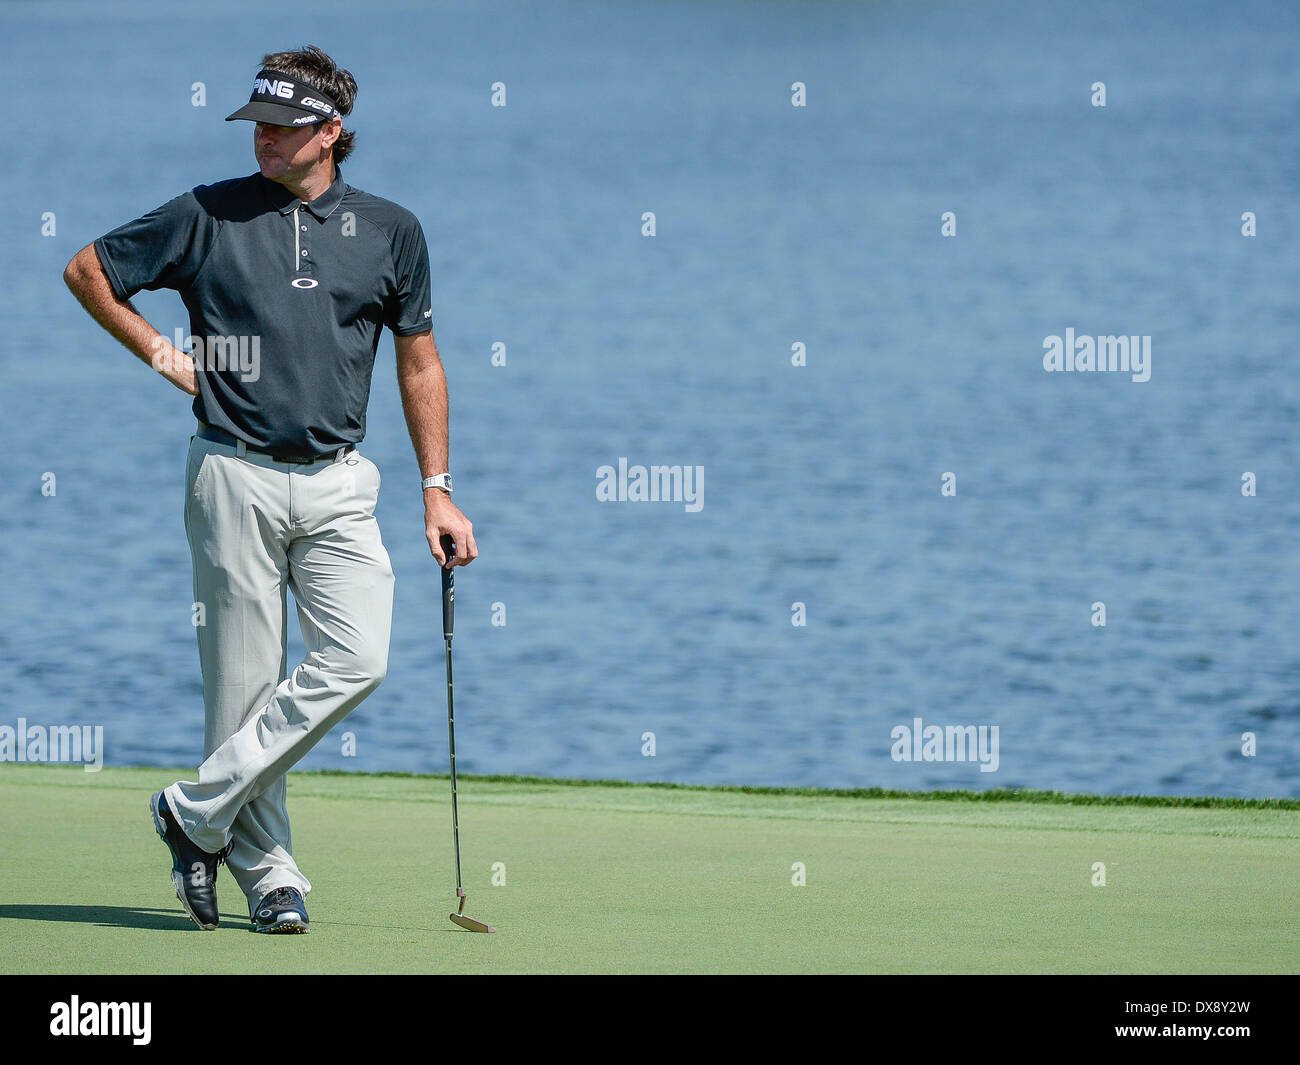 Orlando, Florida, USA. 20th March 2014. Bubba Watson on the par 5 6th green after hitting 2 tee shots into the water during first round golf action of the Arnold Palmer Invitational presented by Mastercard held at Arnold Palmer's Bay Hill Club & Lodge in Orlando, FL Credit:  Cal Sport Media/Alamy Live News Stock Photo